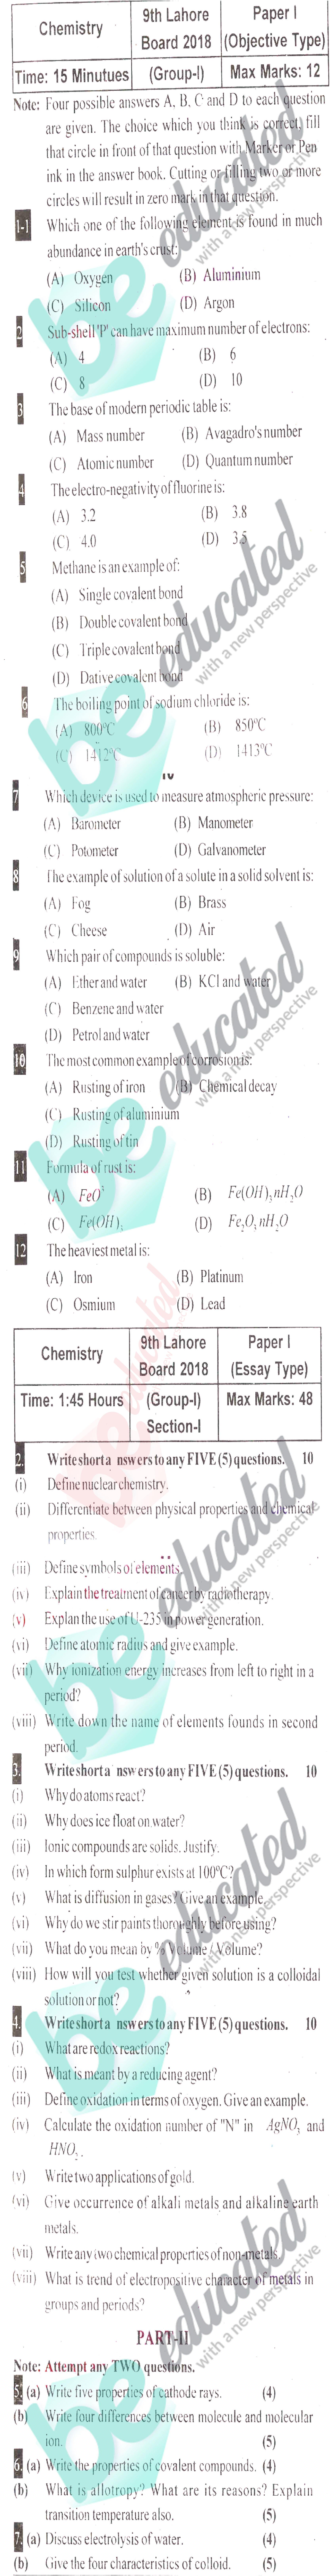 Chemistry 9th Class English Medium Past Paper Group 1 BISE Lahore 2018